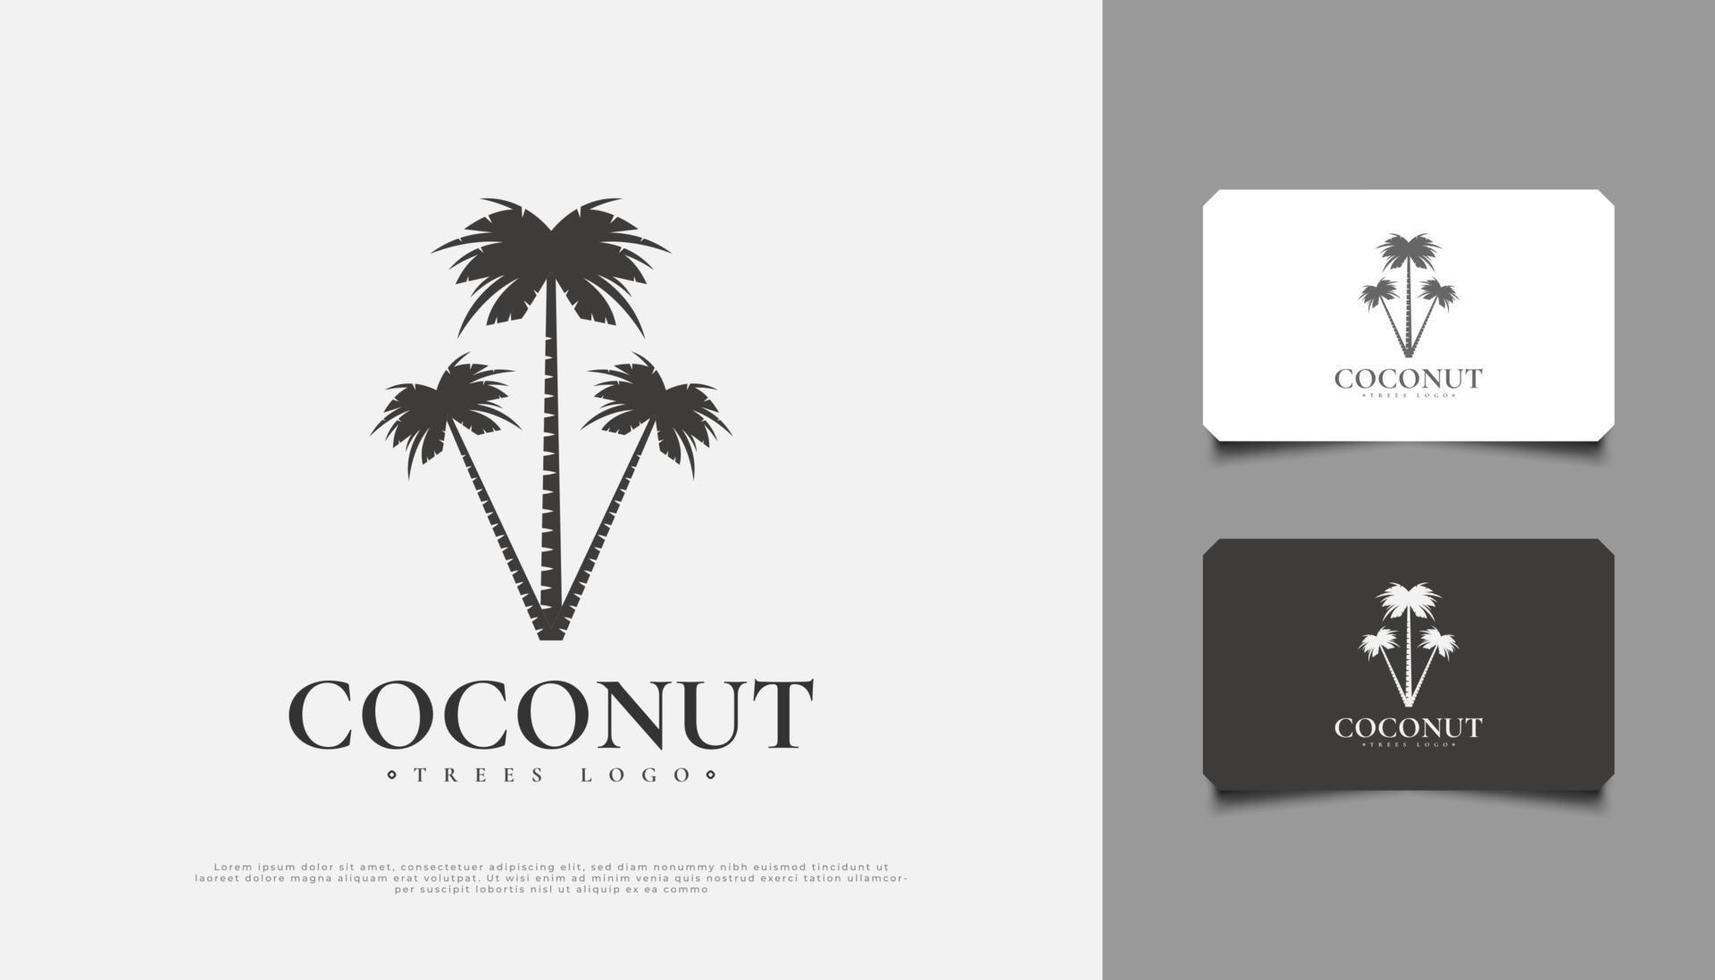 Three Coconut Trees Logo Design, Suitable for Resort, Travel or Tourism Industry vector